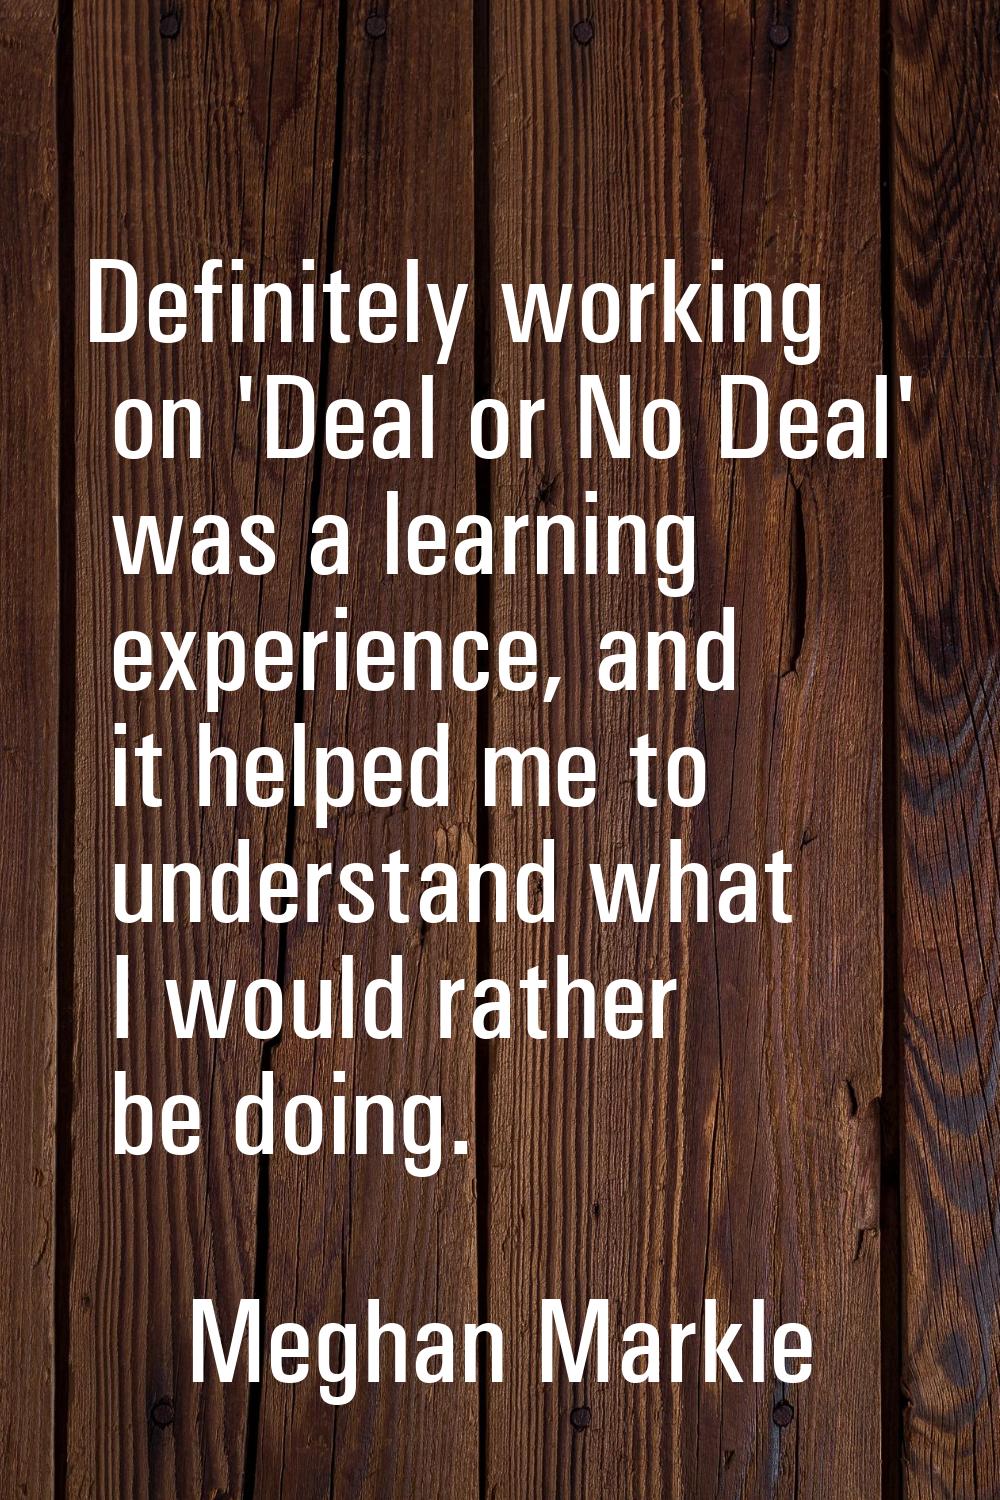 Definitely working on 'Deal or No Deal' was a learning experience, and it helped me to understand w